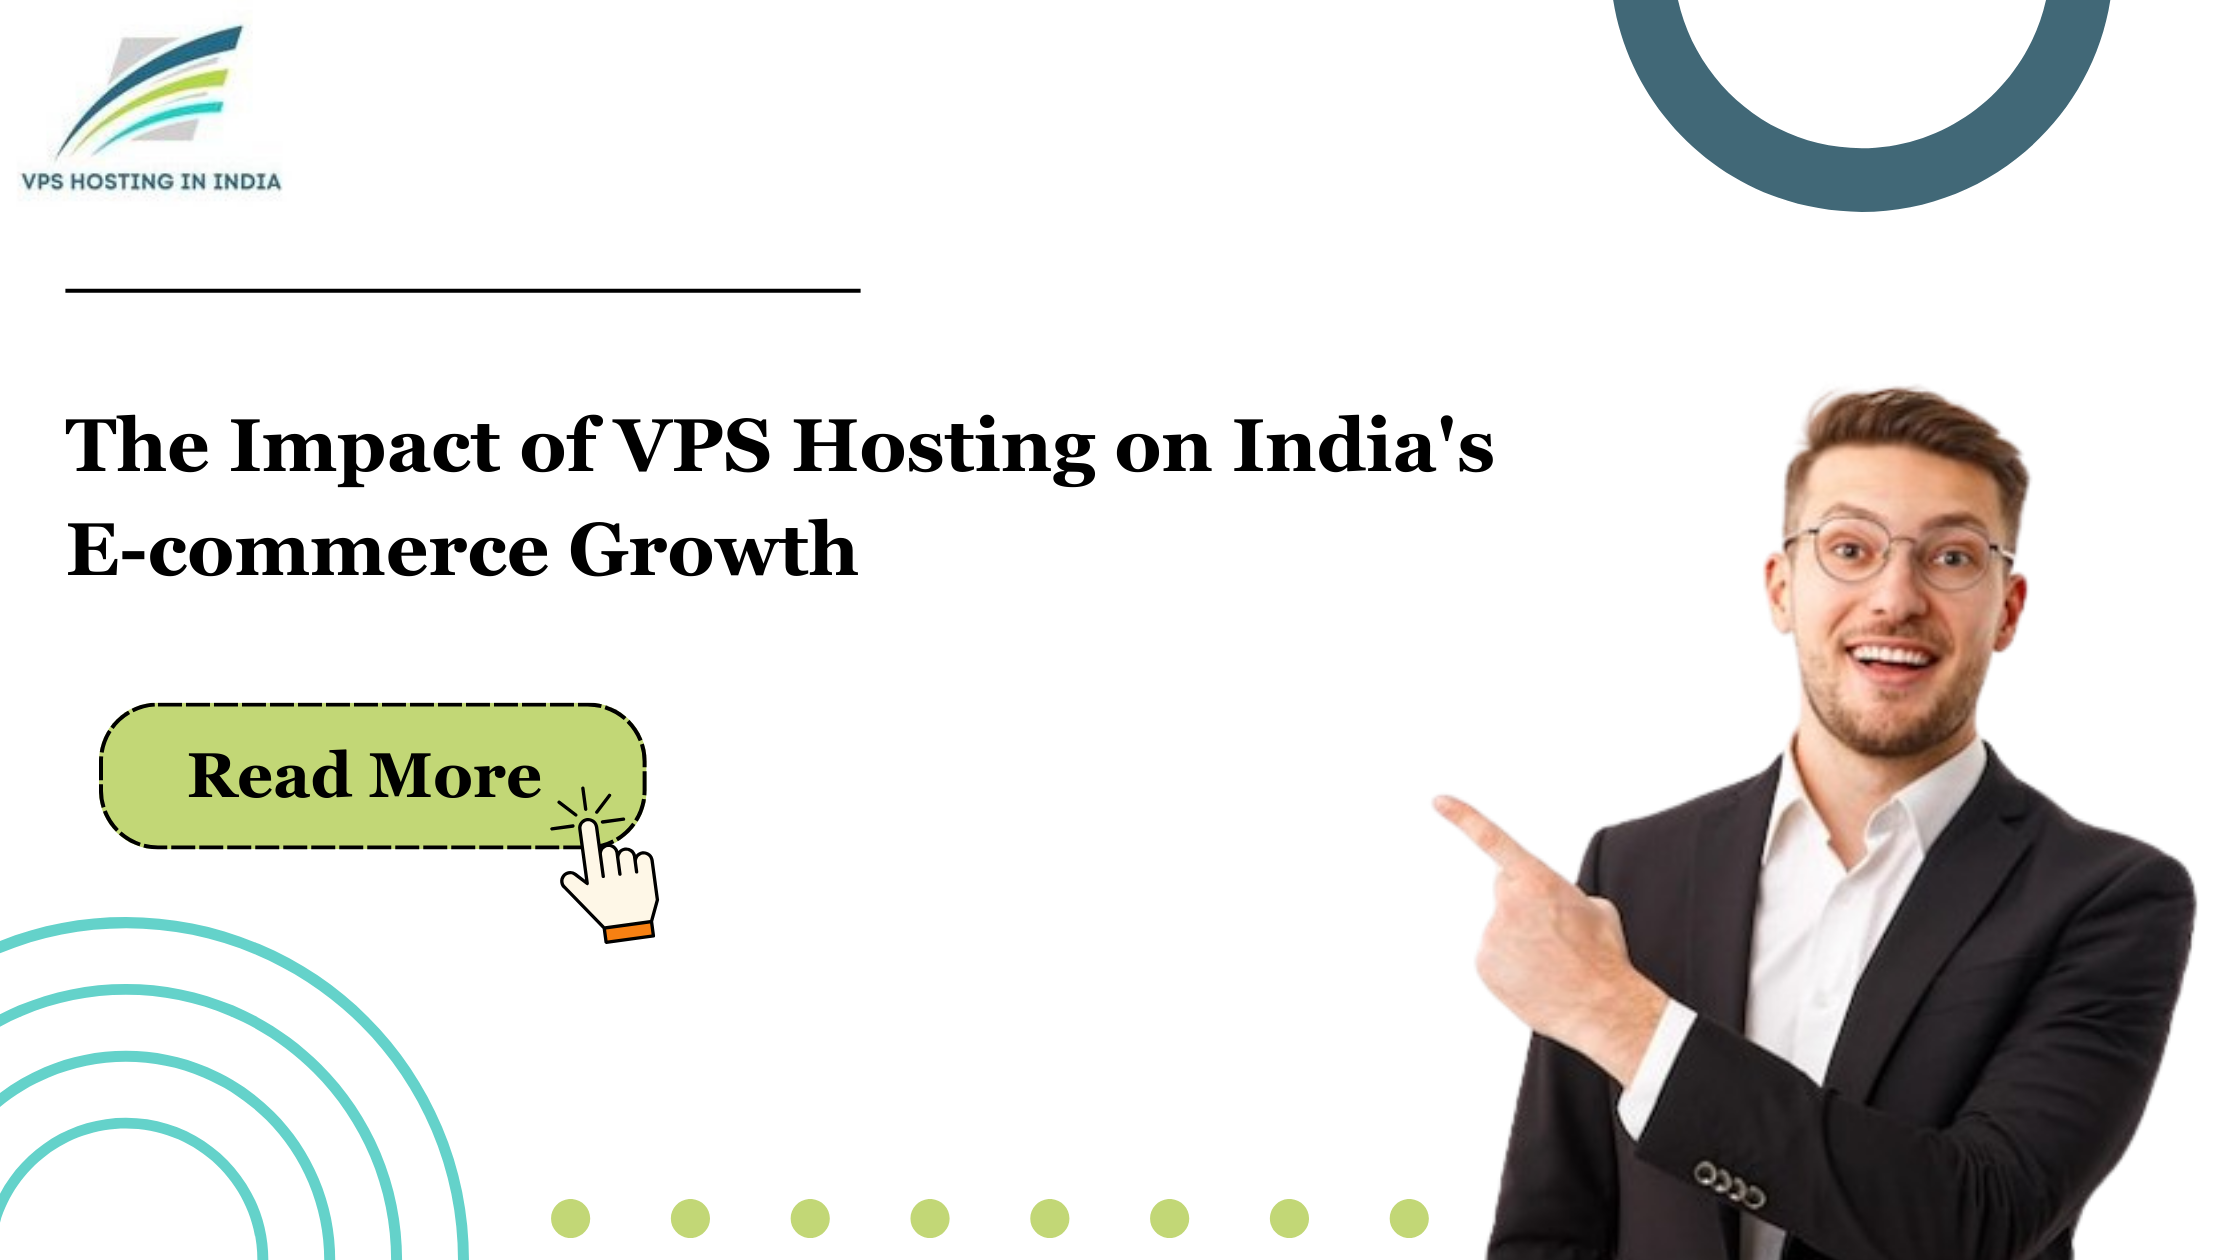 The Impact of VPS Hosting on India's E-commerce Growth